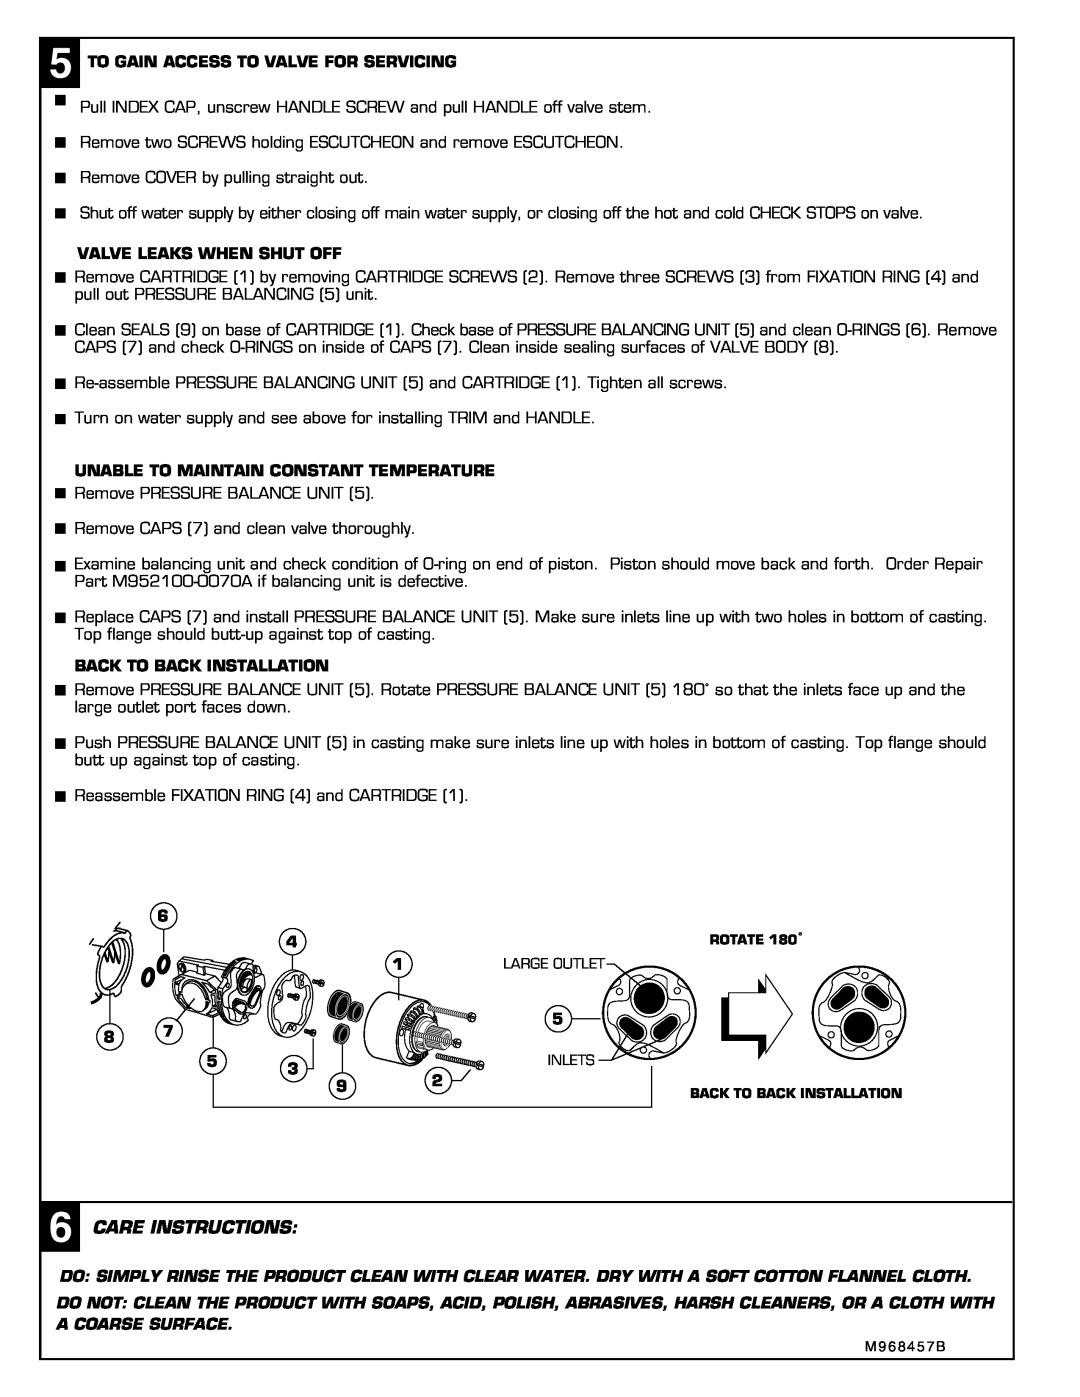 American Standard 6022, 6021 Care Instructions, To Gain Access To Valve For Servicing, Valve Leaks When Shut Off 